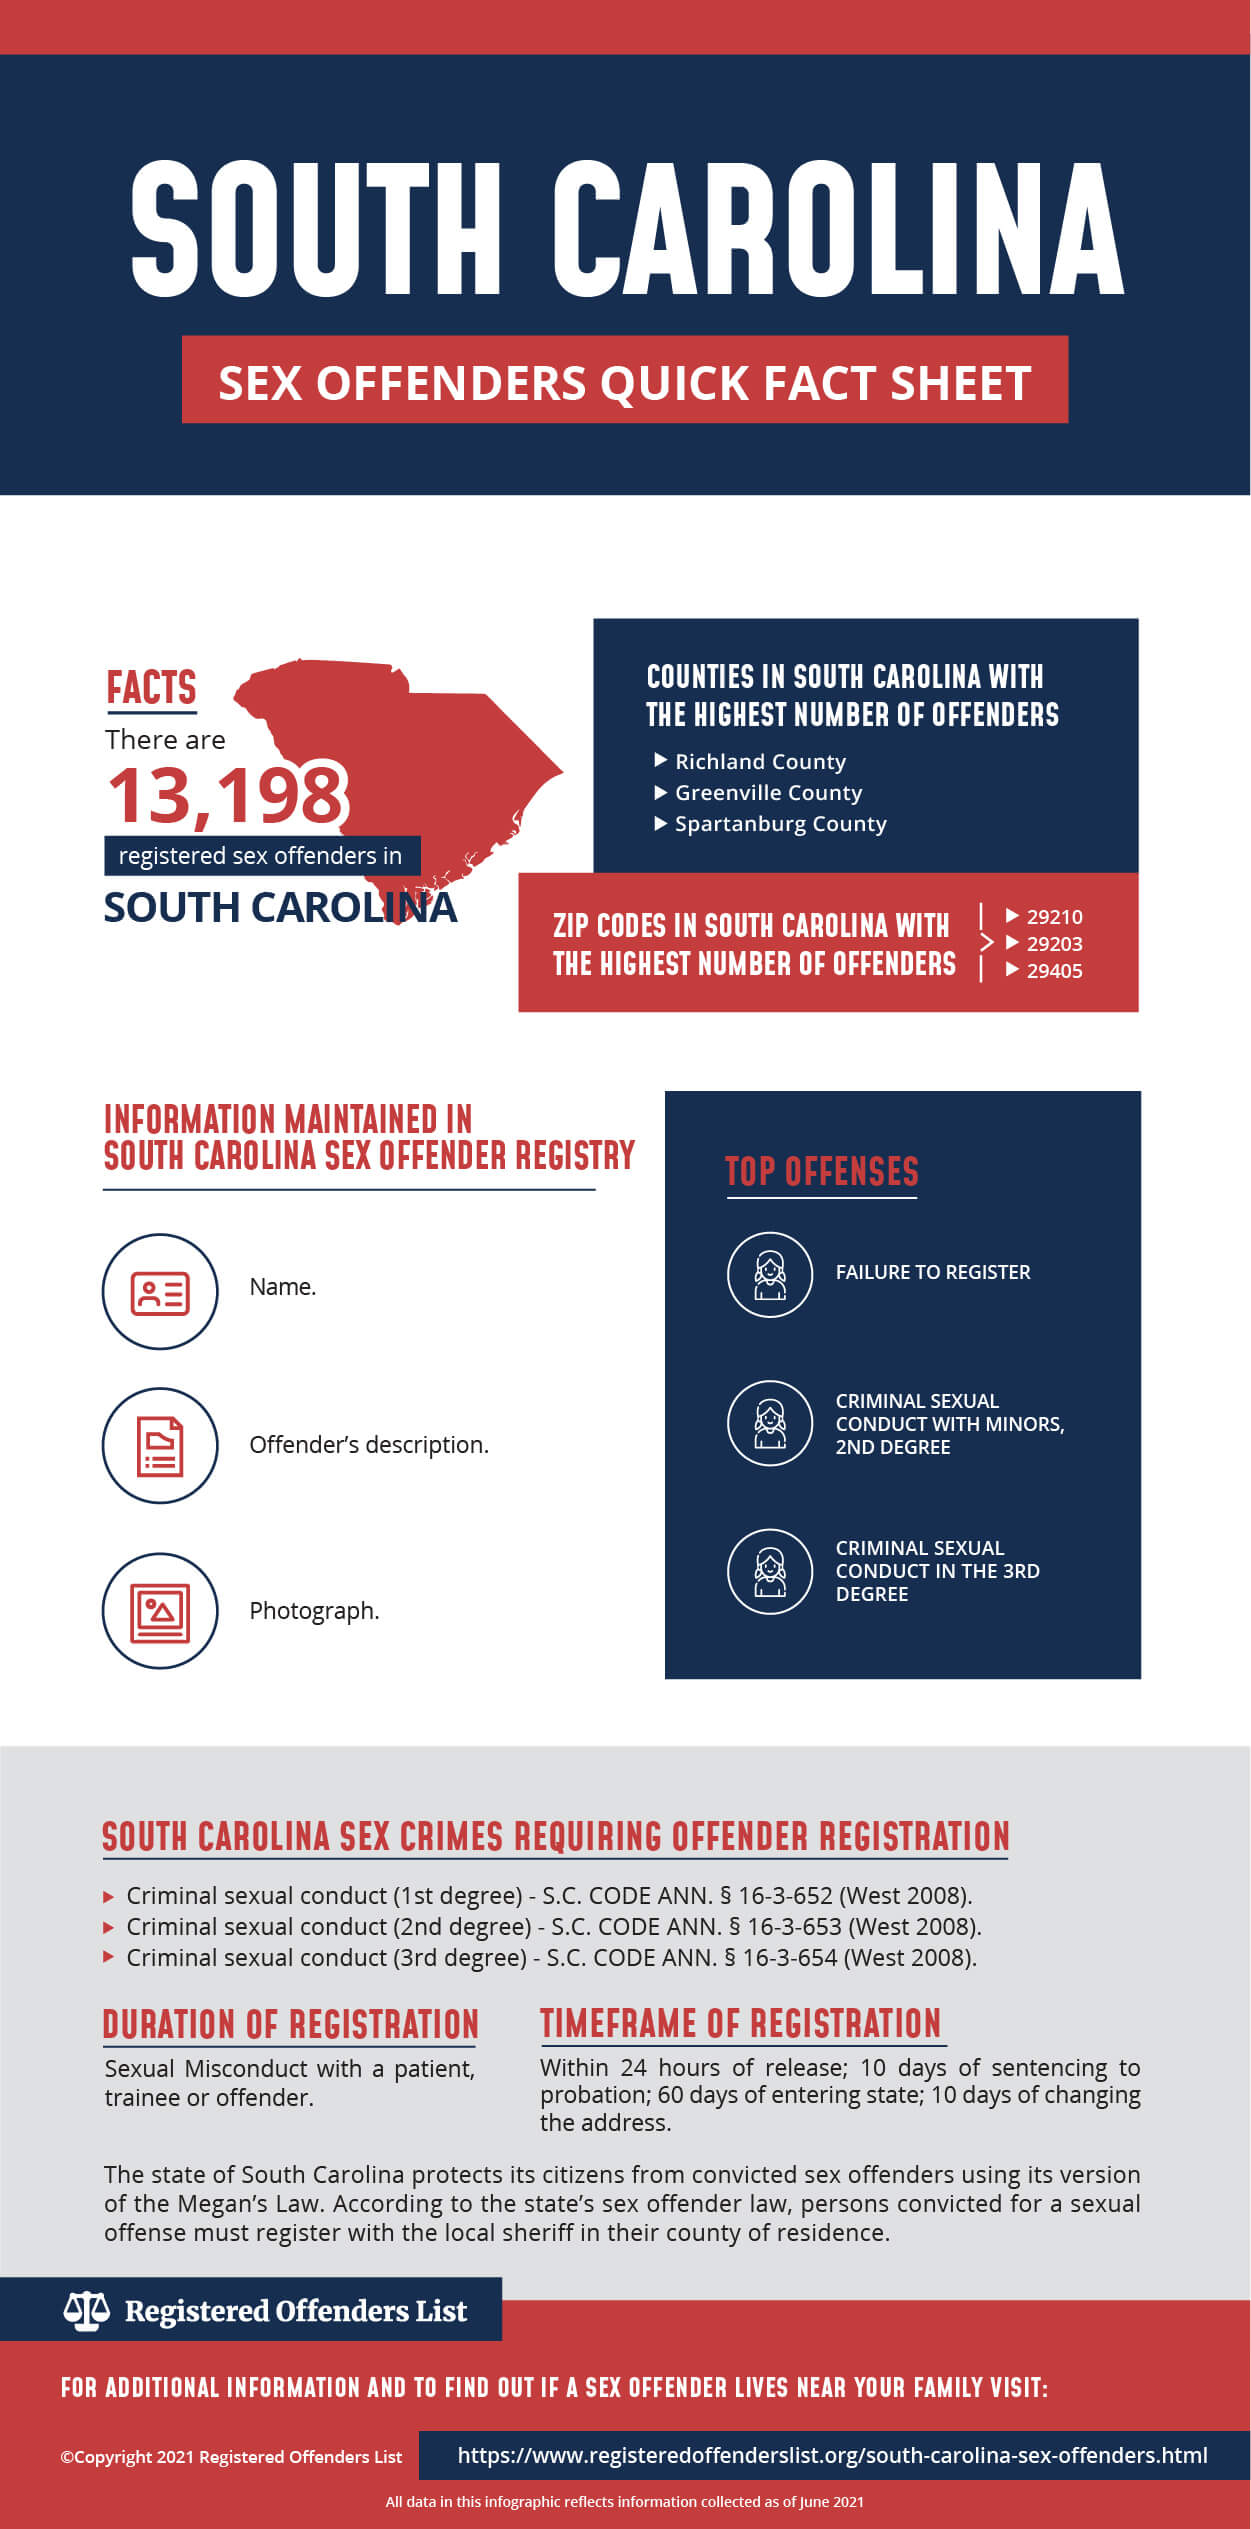 Registered Offenders List Find Sex Offenders In South Carolina